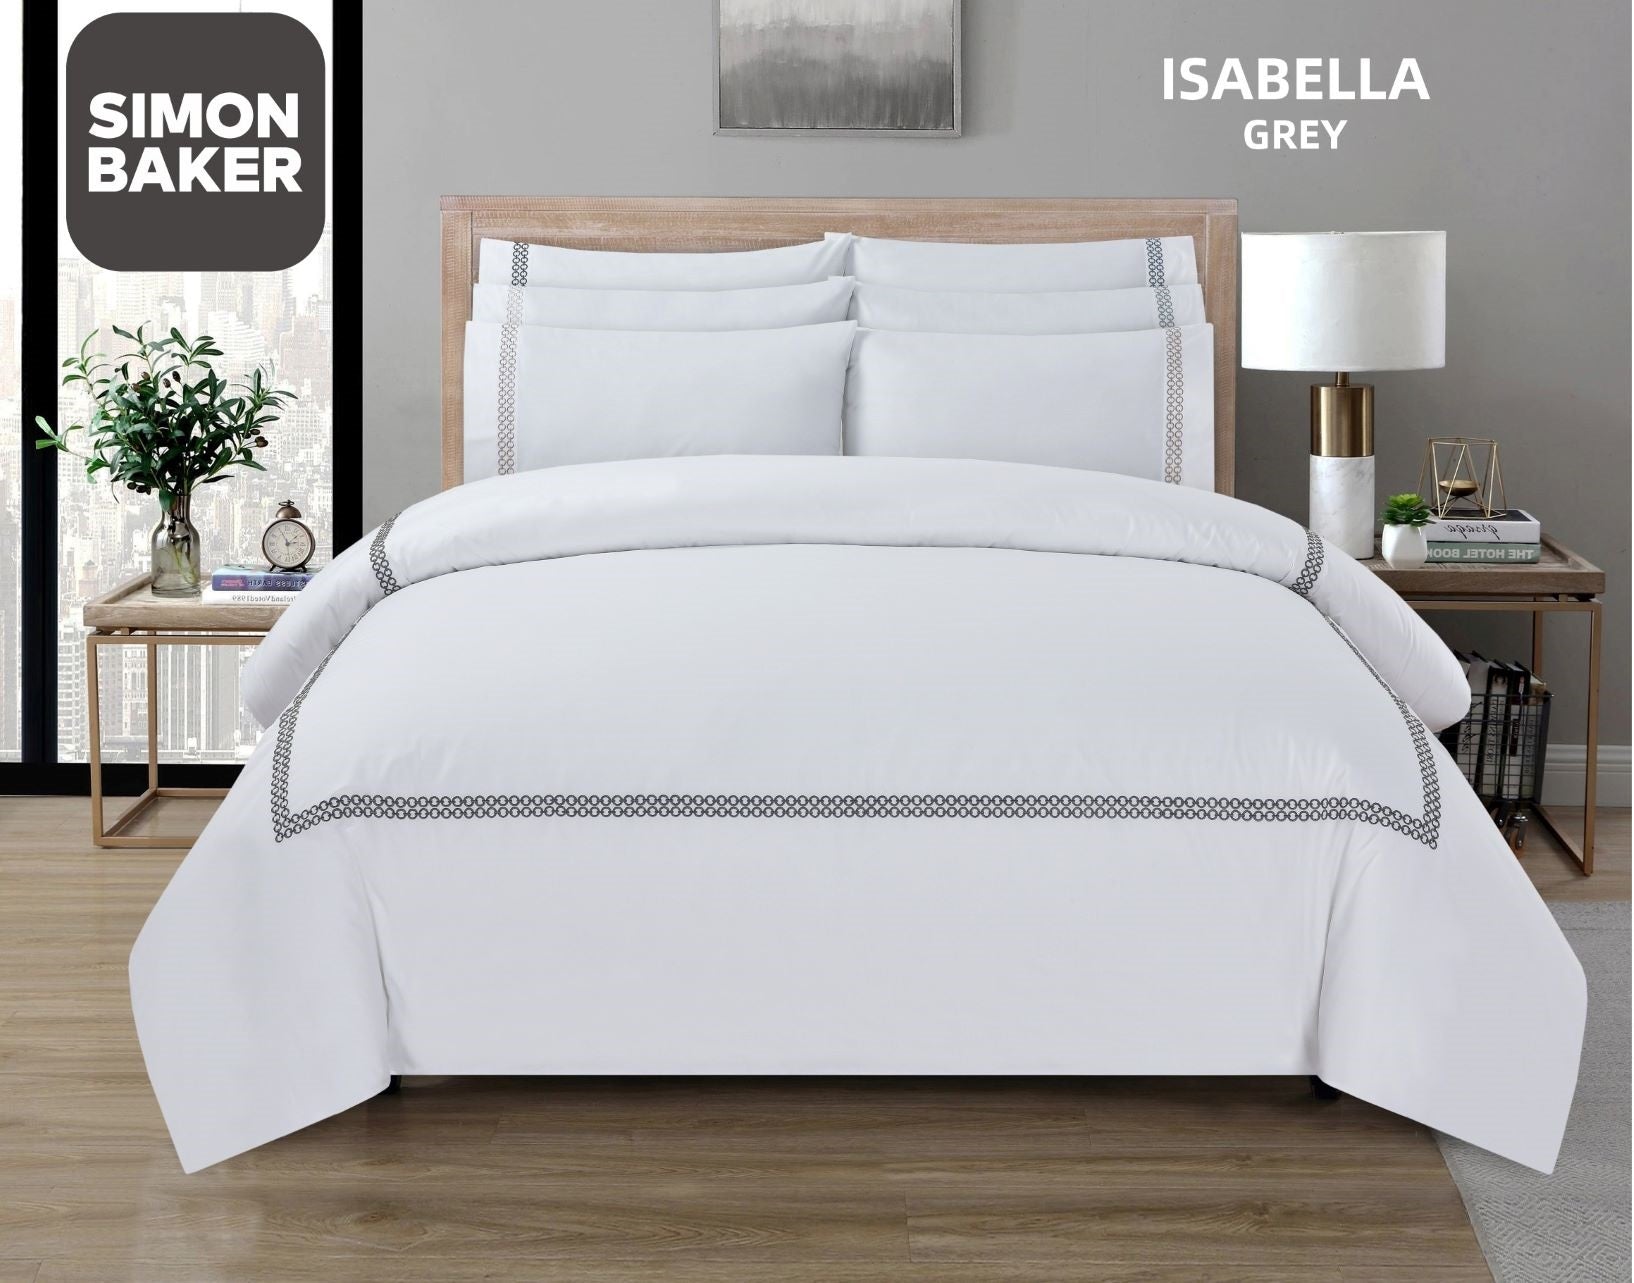 Simon Baker | T200 Cotton Percale Embroidered Duvet Cover Set - Isabella Grey (Various Sizes)